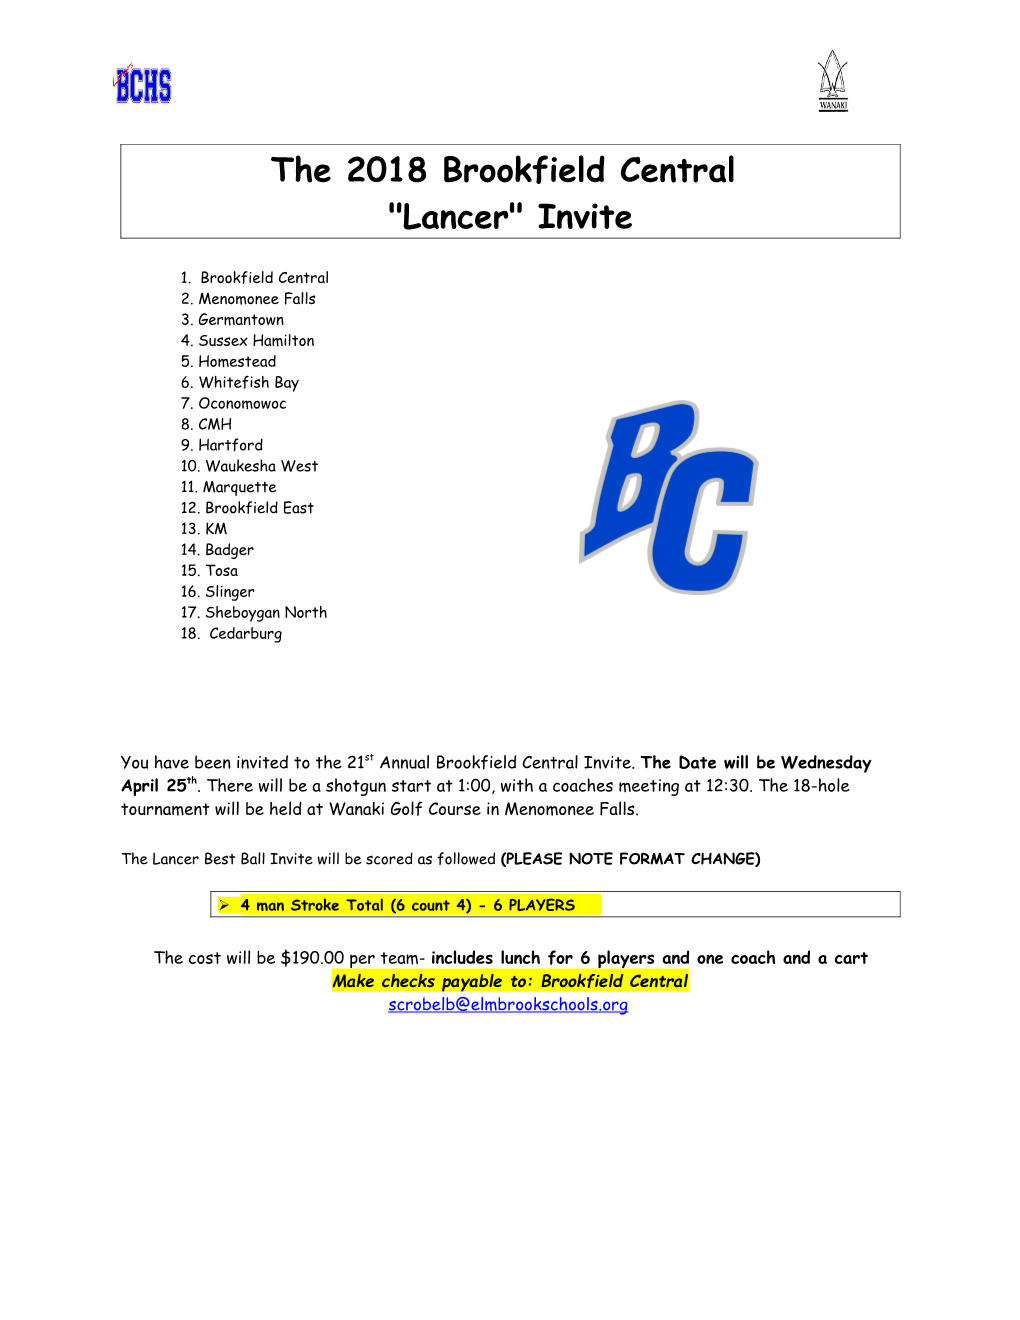 The 2018 Brookfield Central